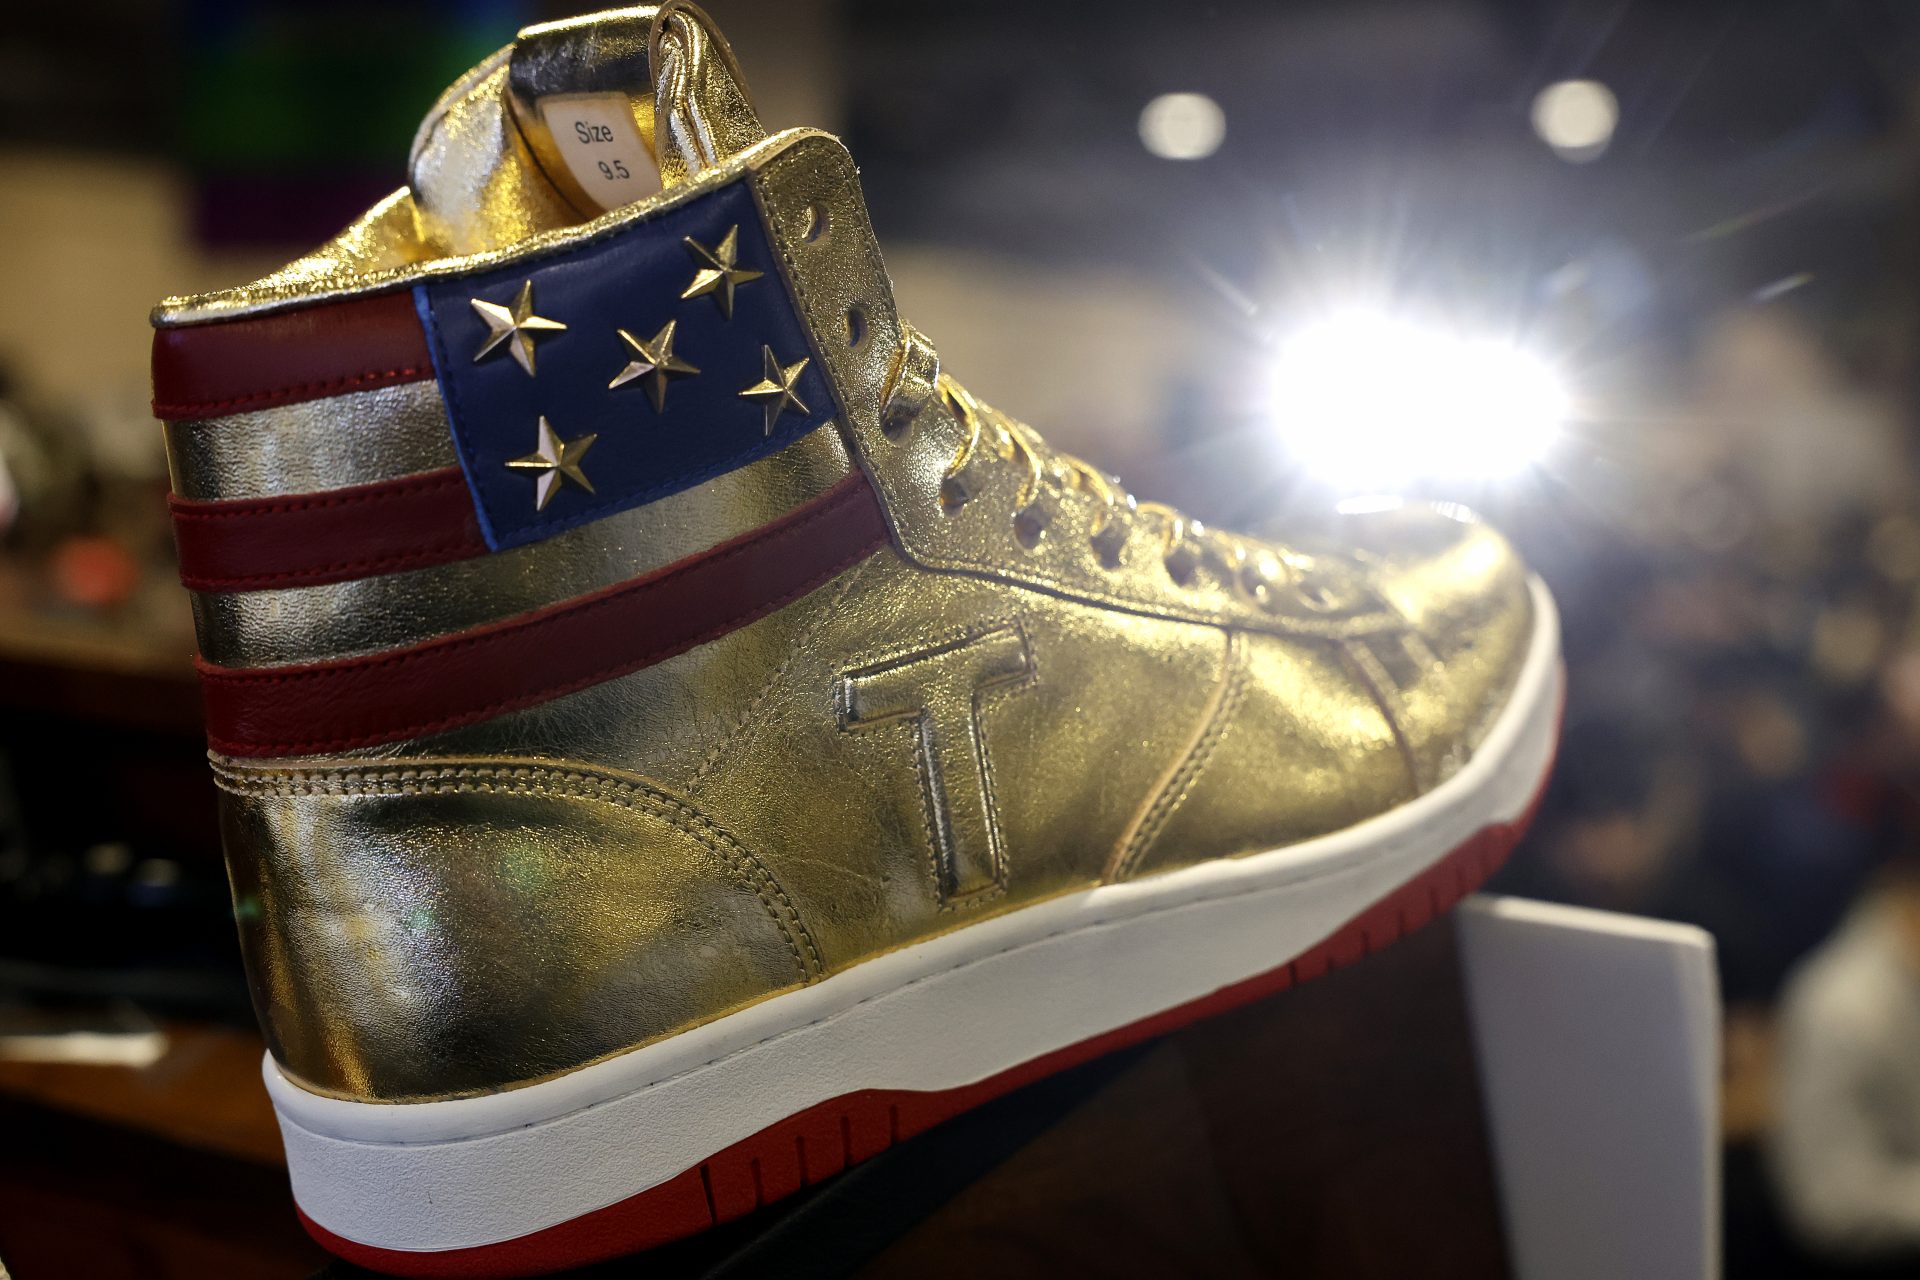 Will Trump's shoes end up being another business failure?